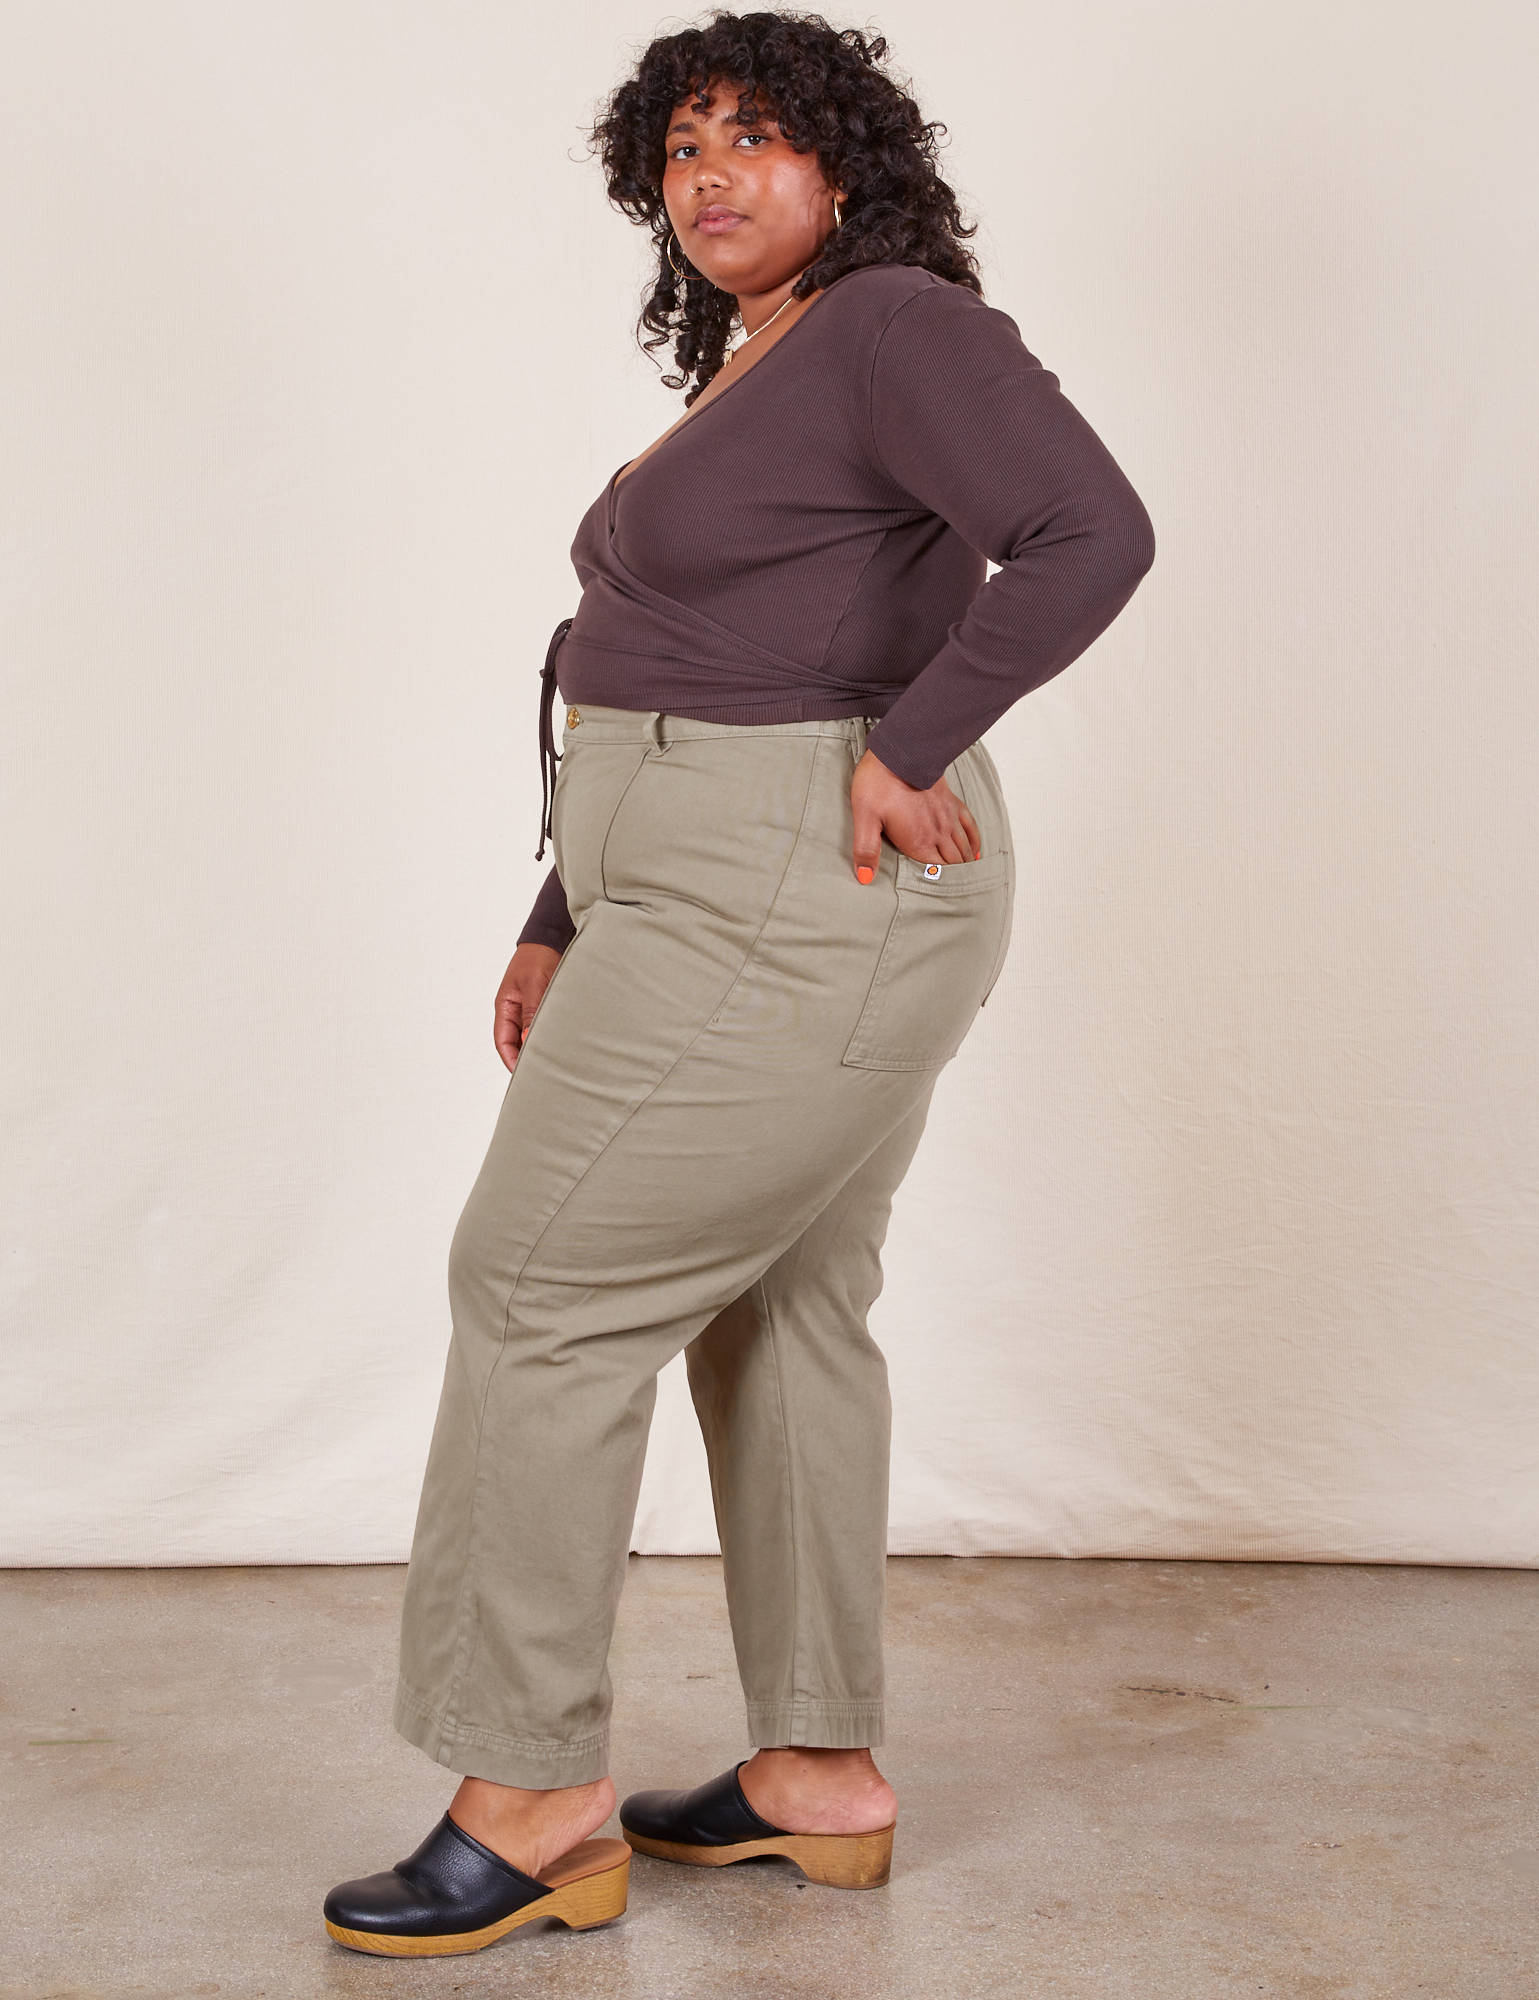 Side view of Western Pants in Khaki Grey and espresso brown Wrap Top on Morgan